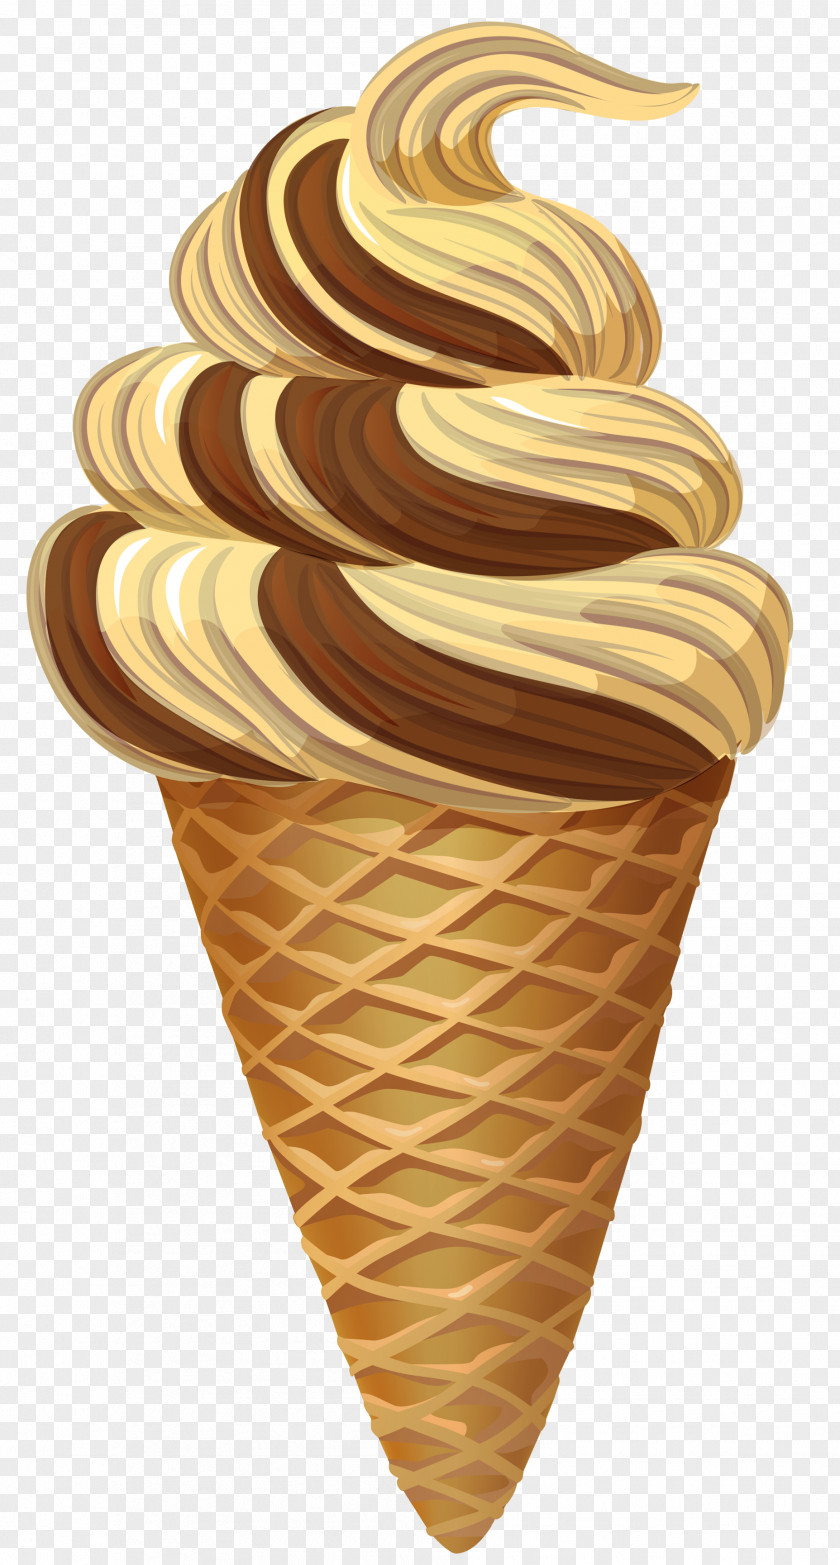 Ice Cream Image Chocolate Cone Flavor PNG